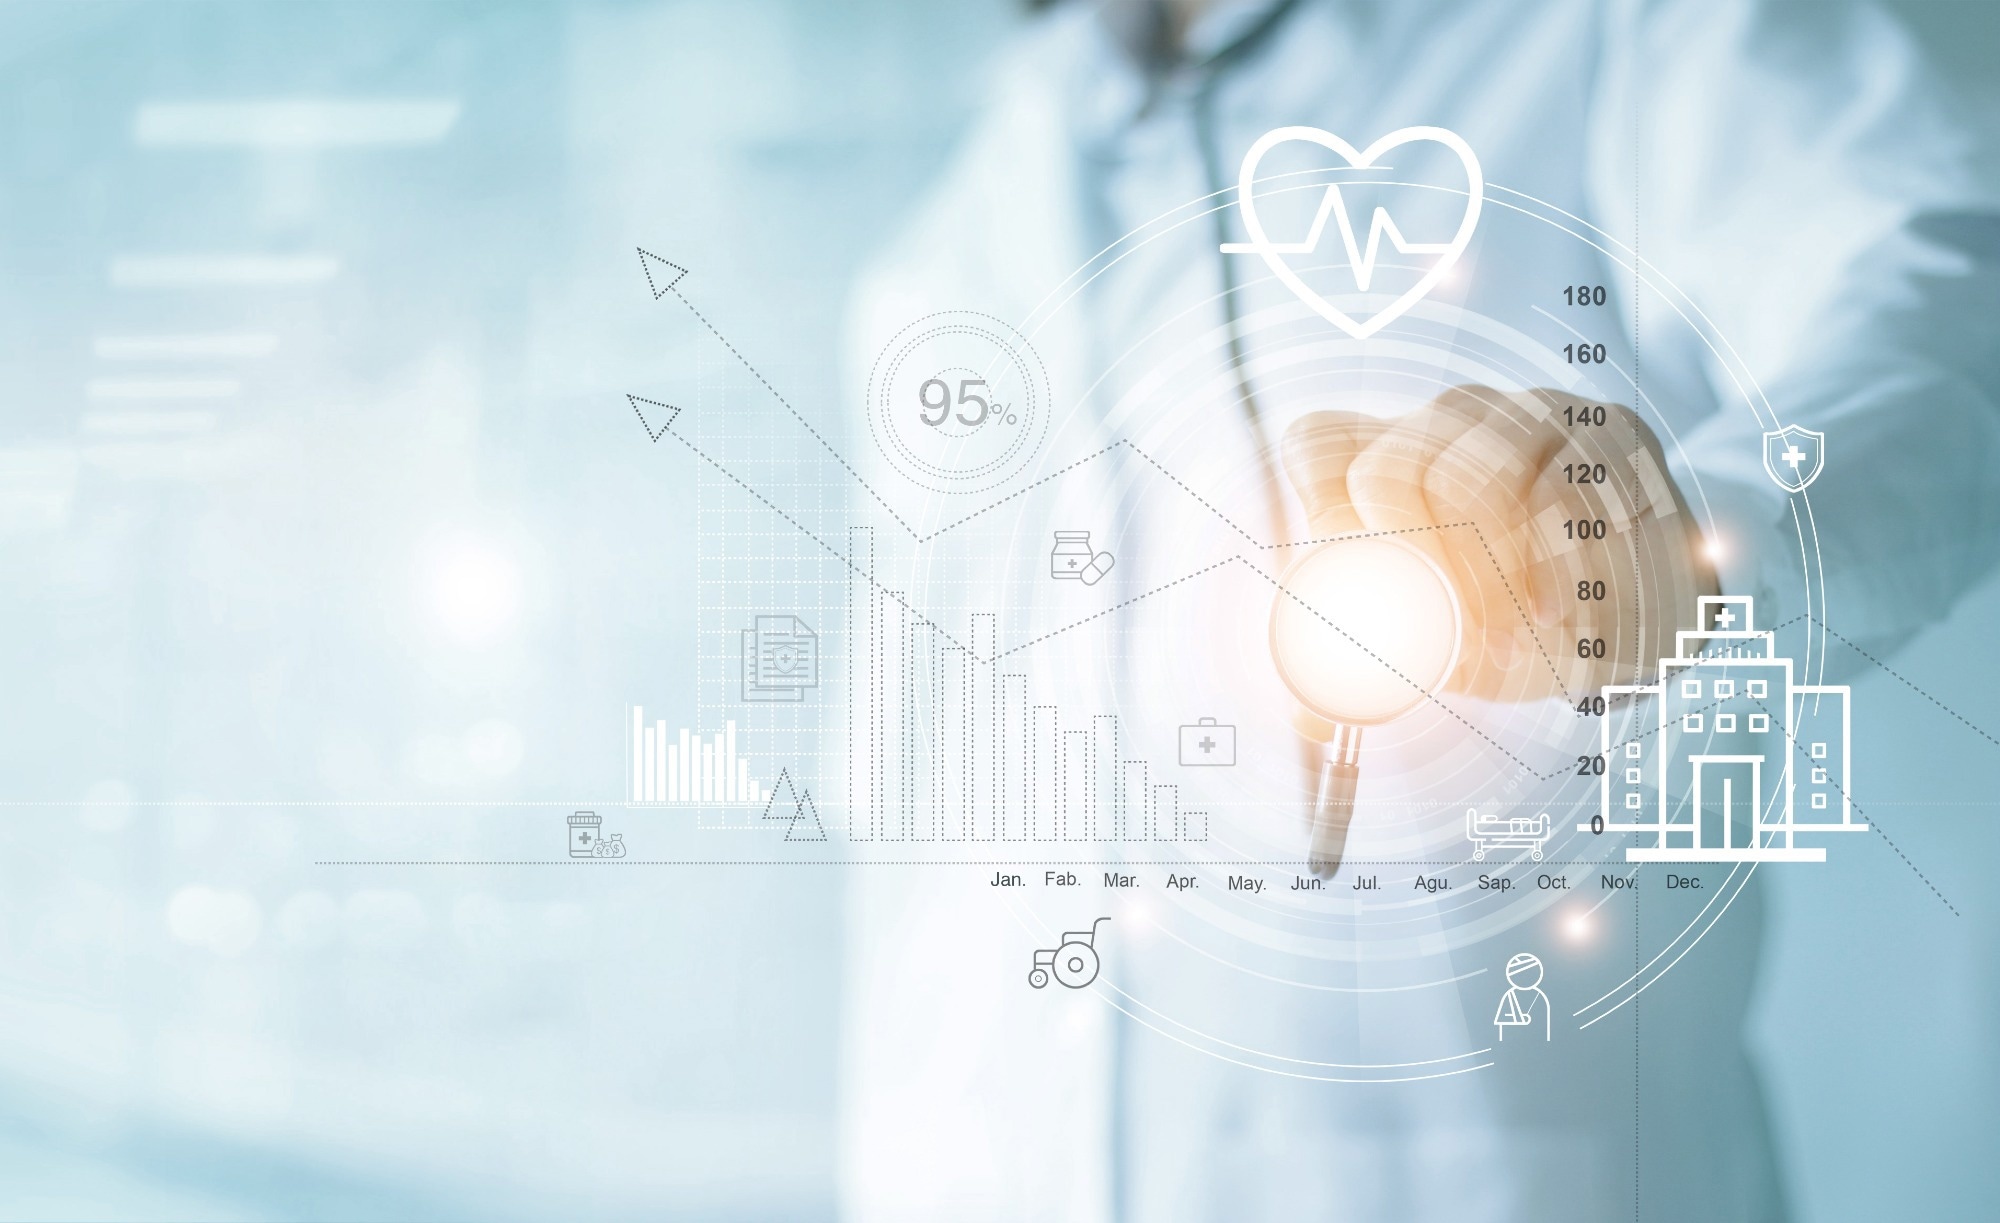 Study: Bridging the AI Translation Gap in Healthcare: A Quality Management System Approach. Image credit: PopTika/Shutterstock